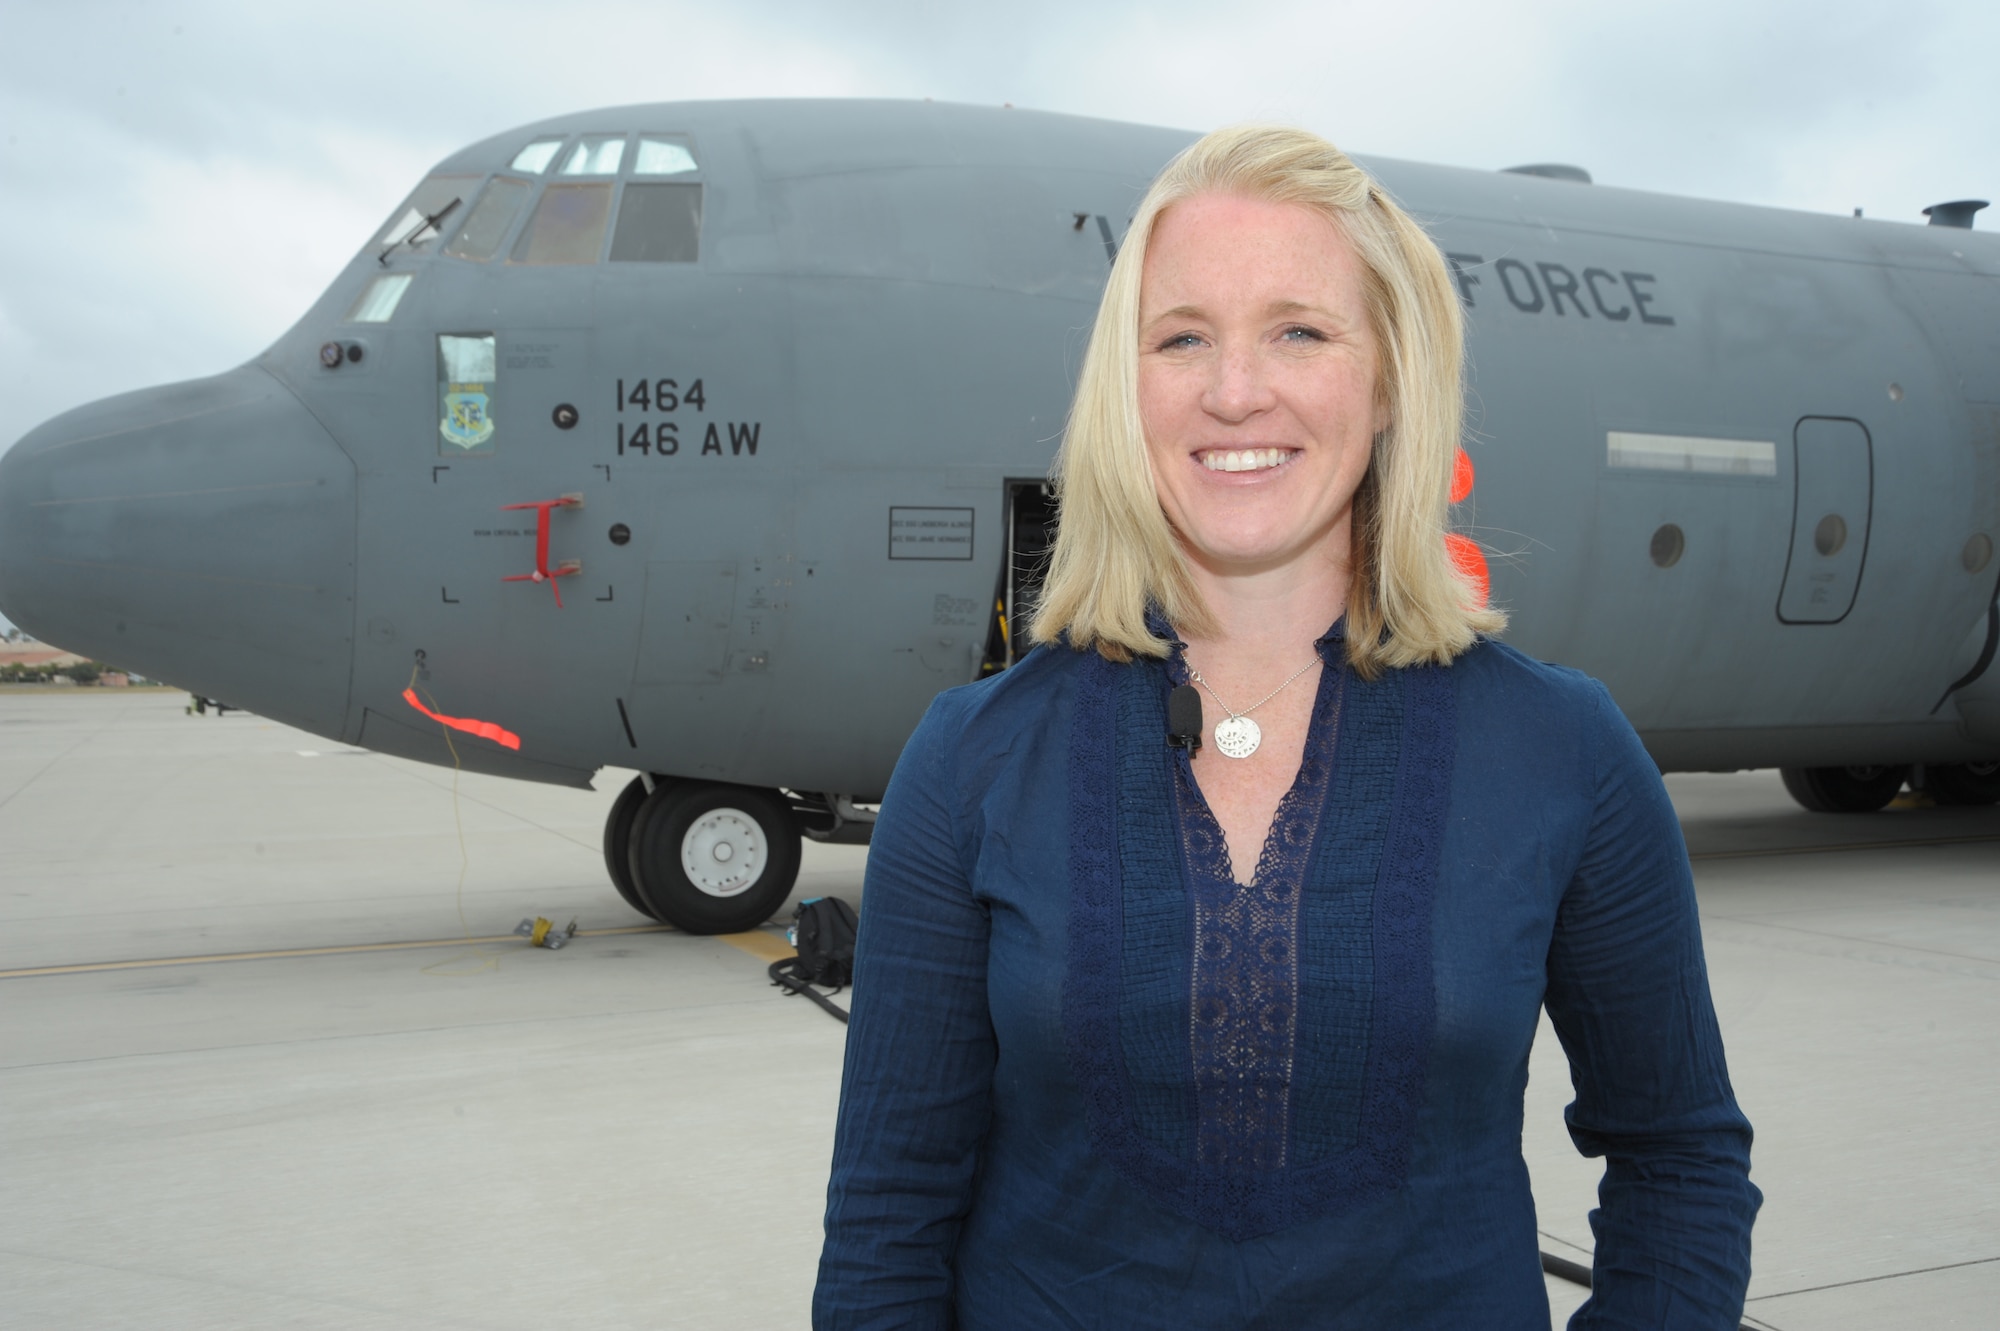 Megan Glynn, standing in front of a C-130J Super Hercules July 13, 2011, was named 2011 Air Force Spouse of the Year in an award program sponsored by Military Spouse magazine.  Her husband, Maj. Matt Glynn, is a C-130J pilot with the California Air National Guard’s 146 Airlift Wing at Channel Islands ANG Station near Oxnard, Calif.  (U.S. Air Force photo)